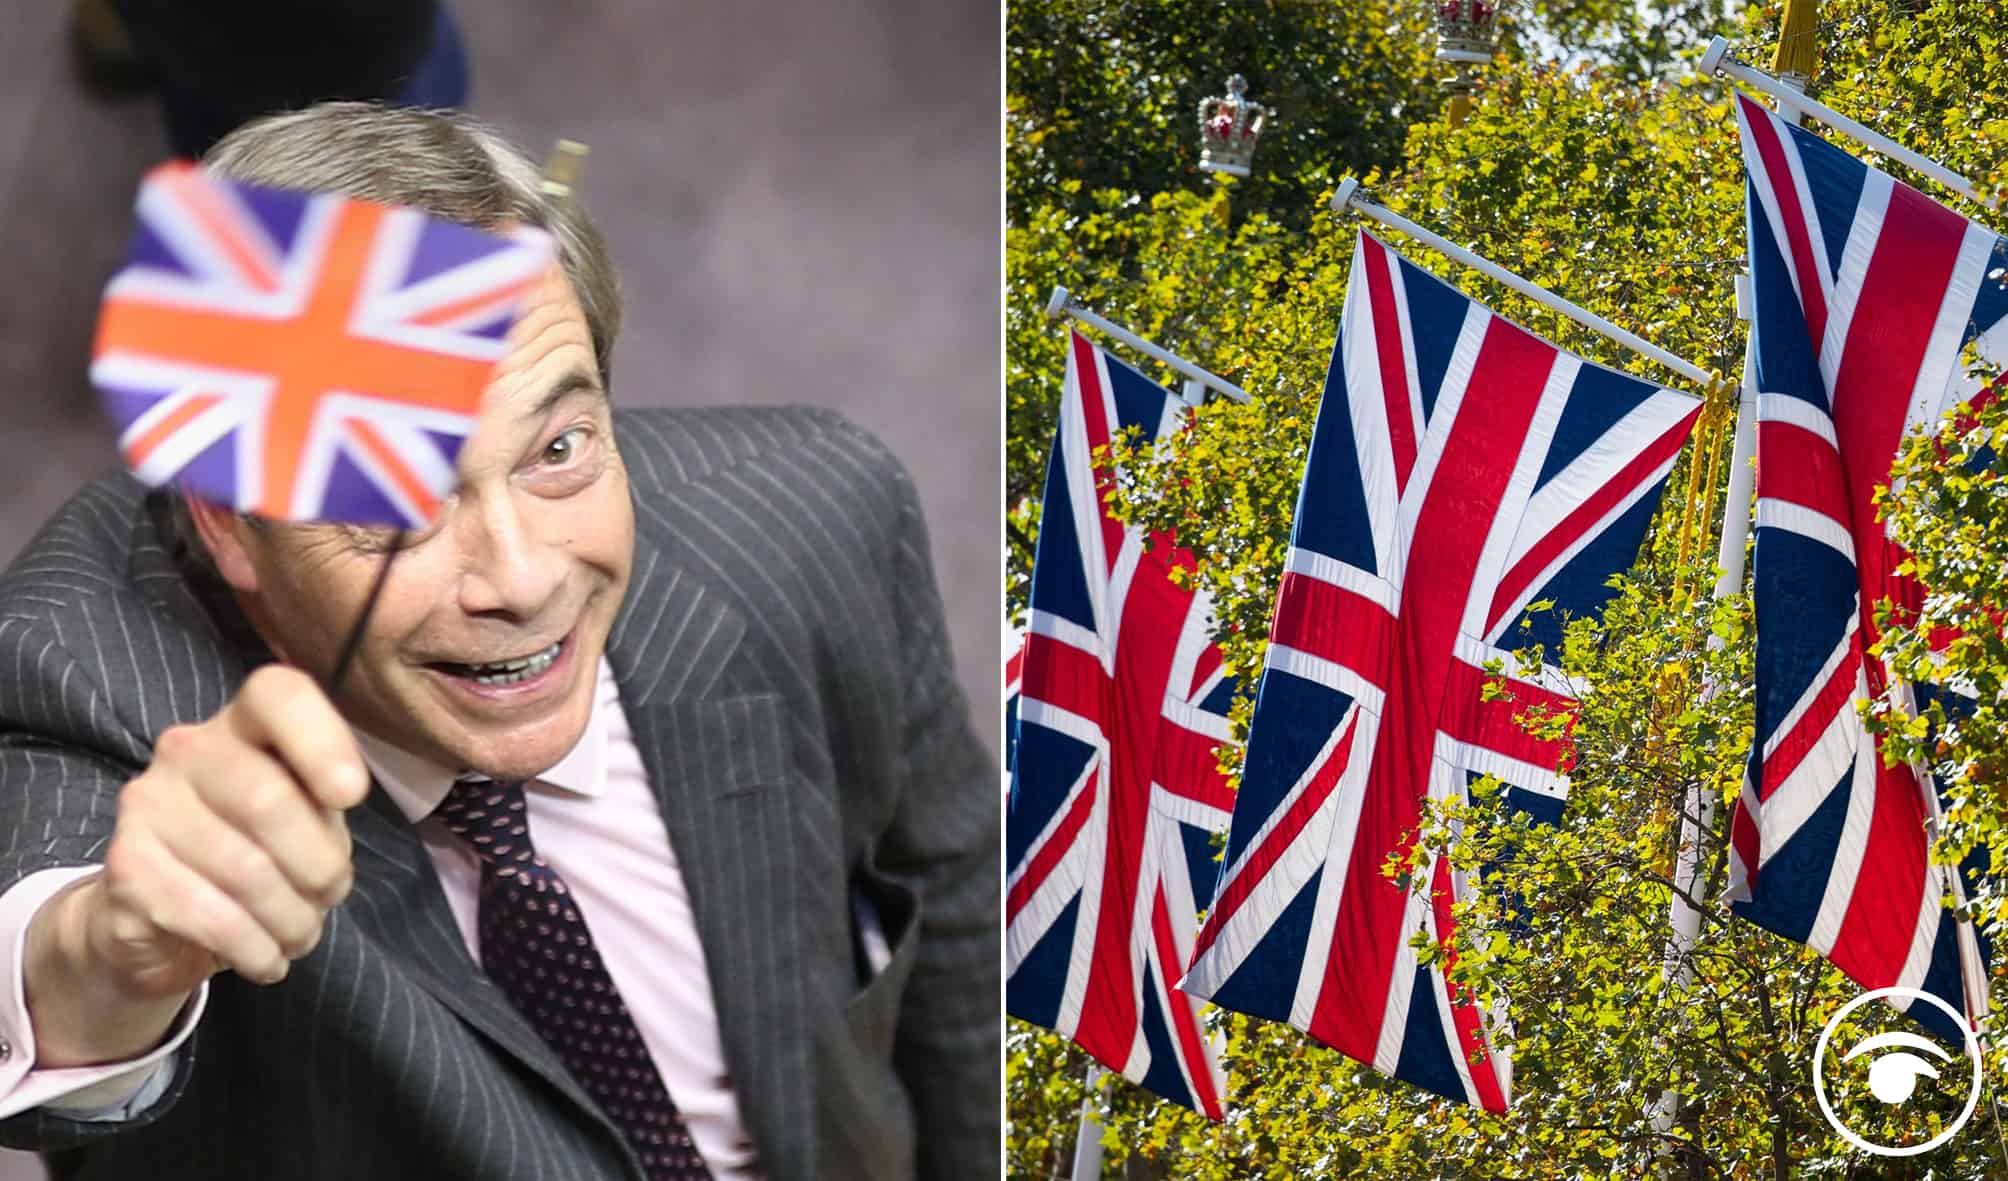 Best reactions to Government’s plan to fly Union Flag from Government buildings